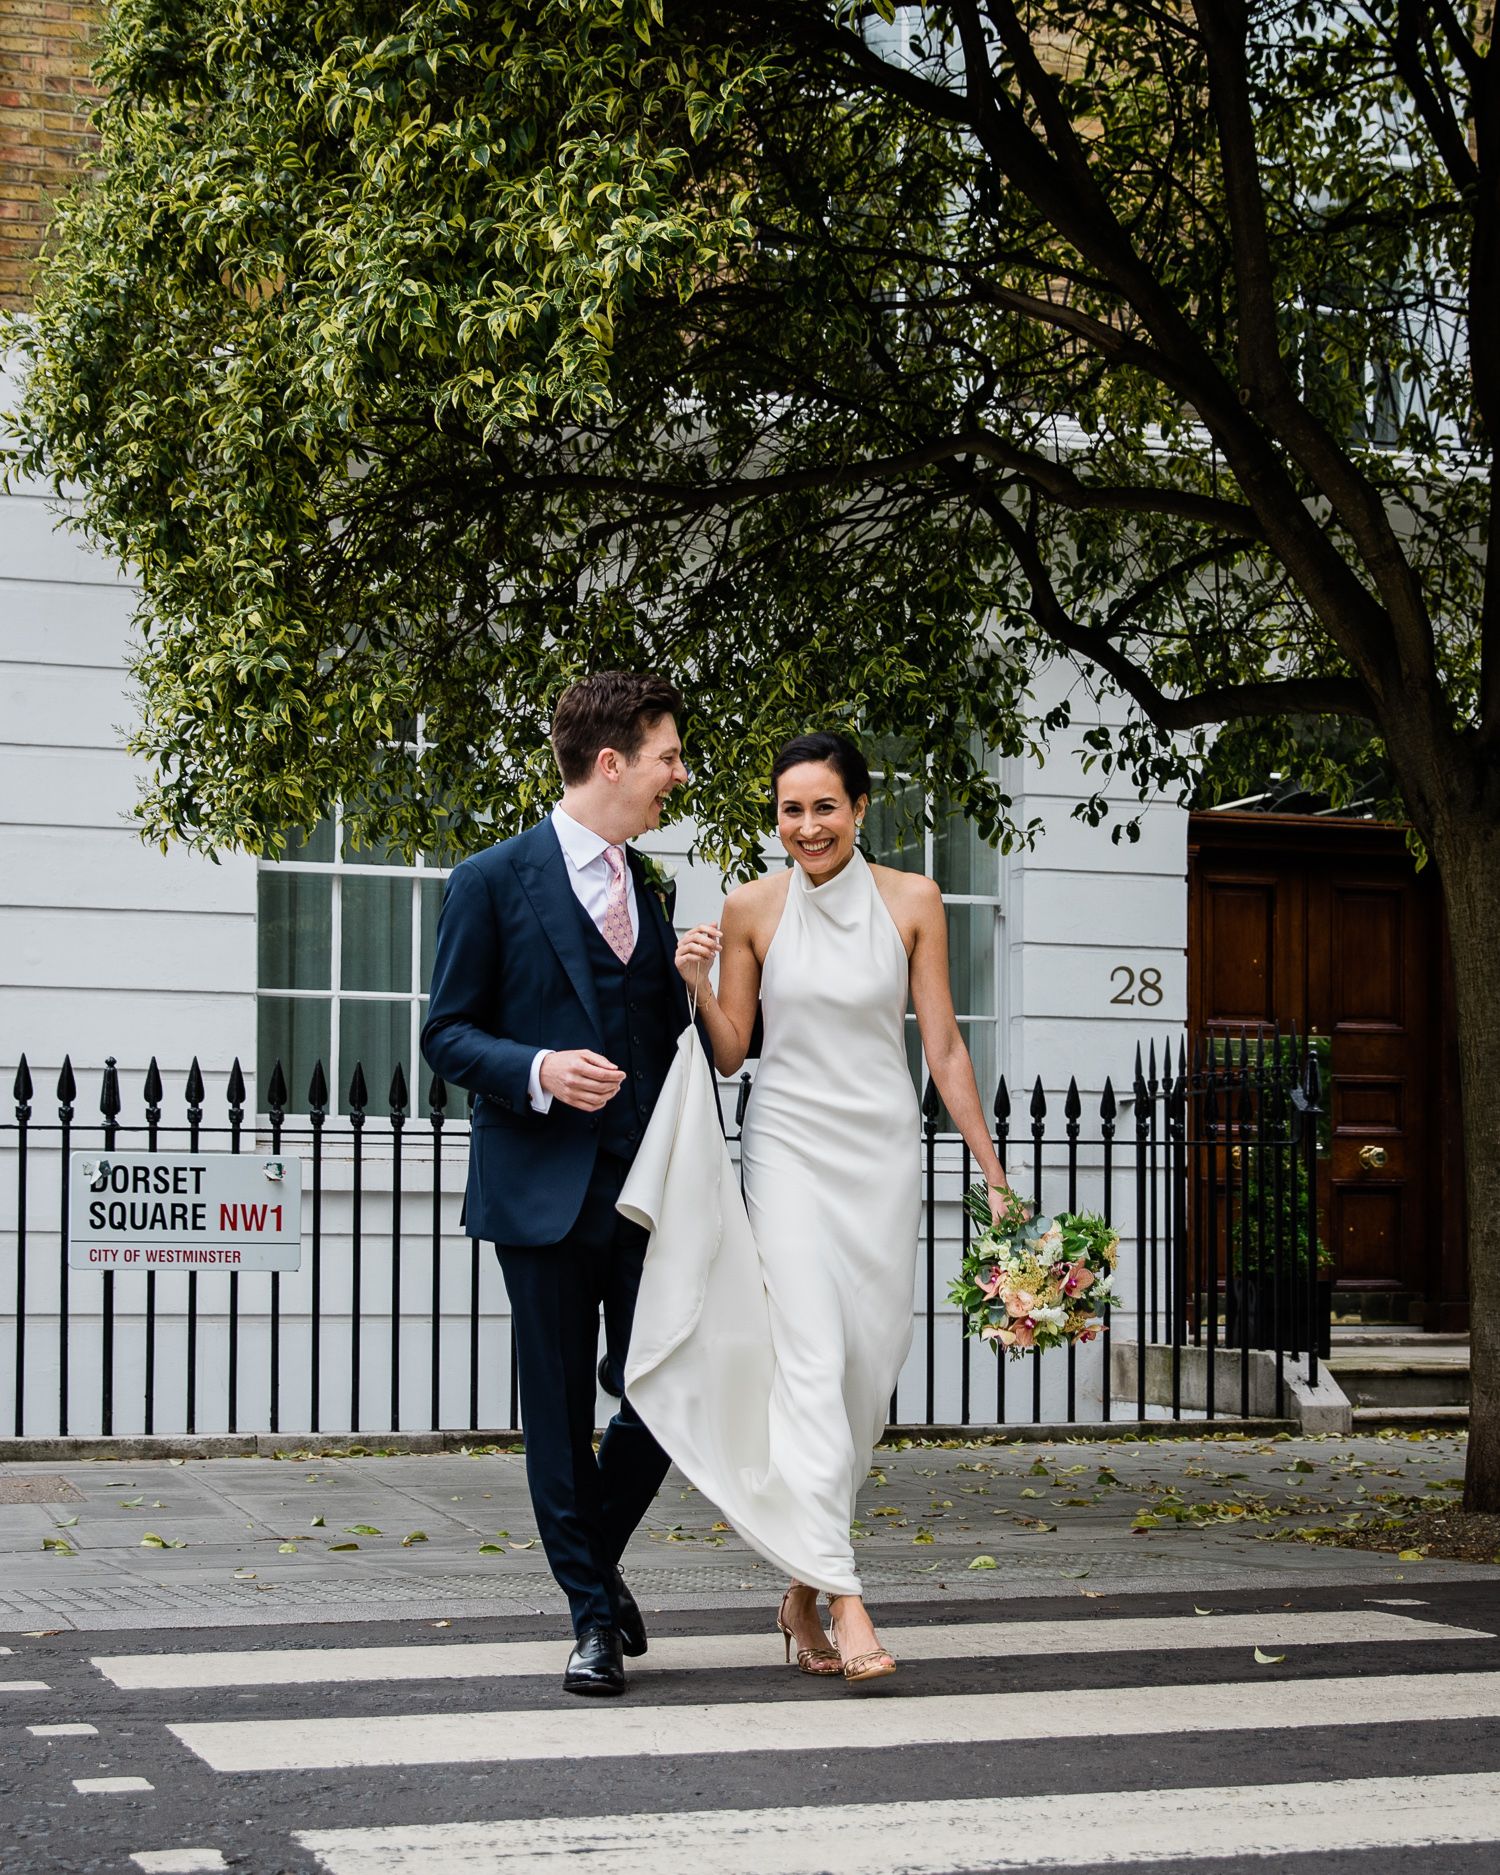 eclection photography london wedding eclection 5